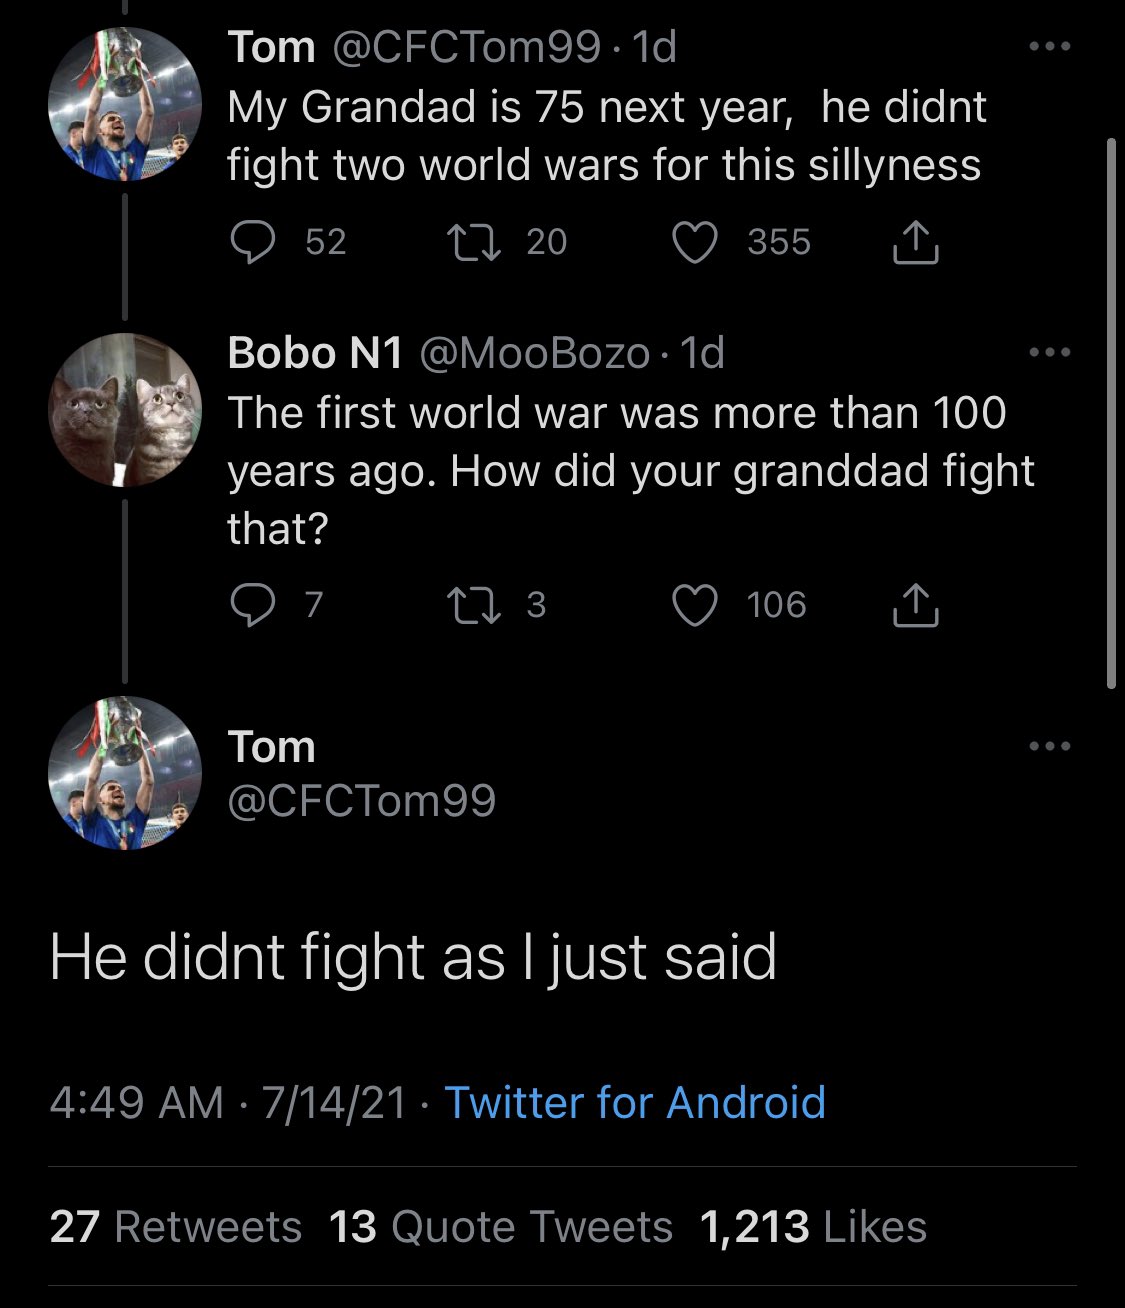 Best Tweets of All Time - my grandpa didn t fight in two world wars - Tom .1d My Grandad is 75 next year, he didnt fight two world wars for this sillyness 52 355 Tom 20 Bobo N1 . 1d The first world war was more than 100 years ago. How did your granddad fi